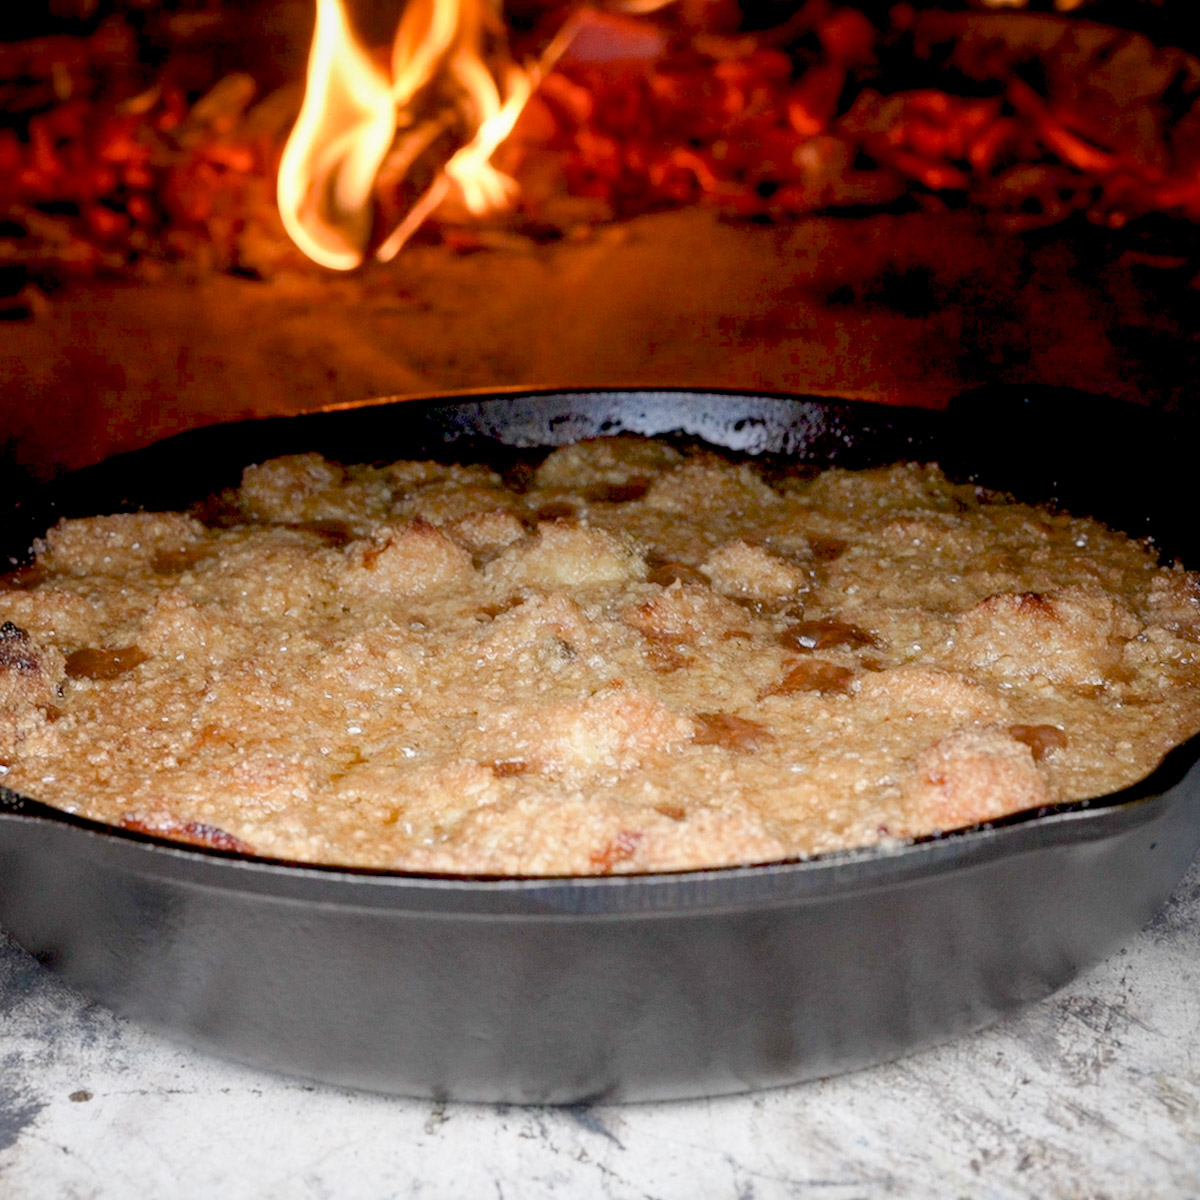 Bacon apple crisp in a wood-fired oven.